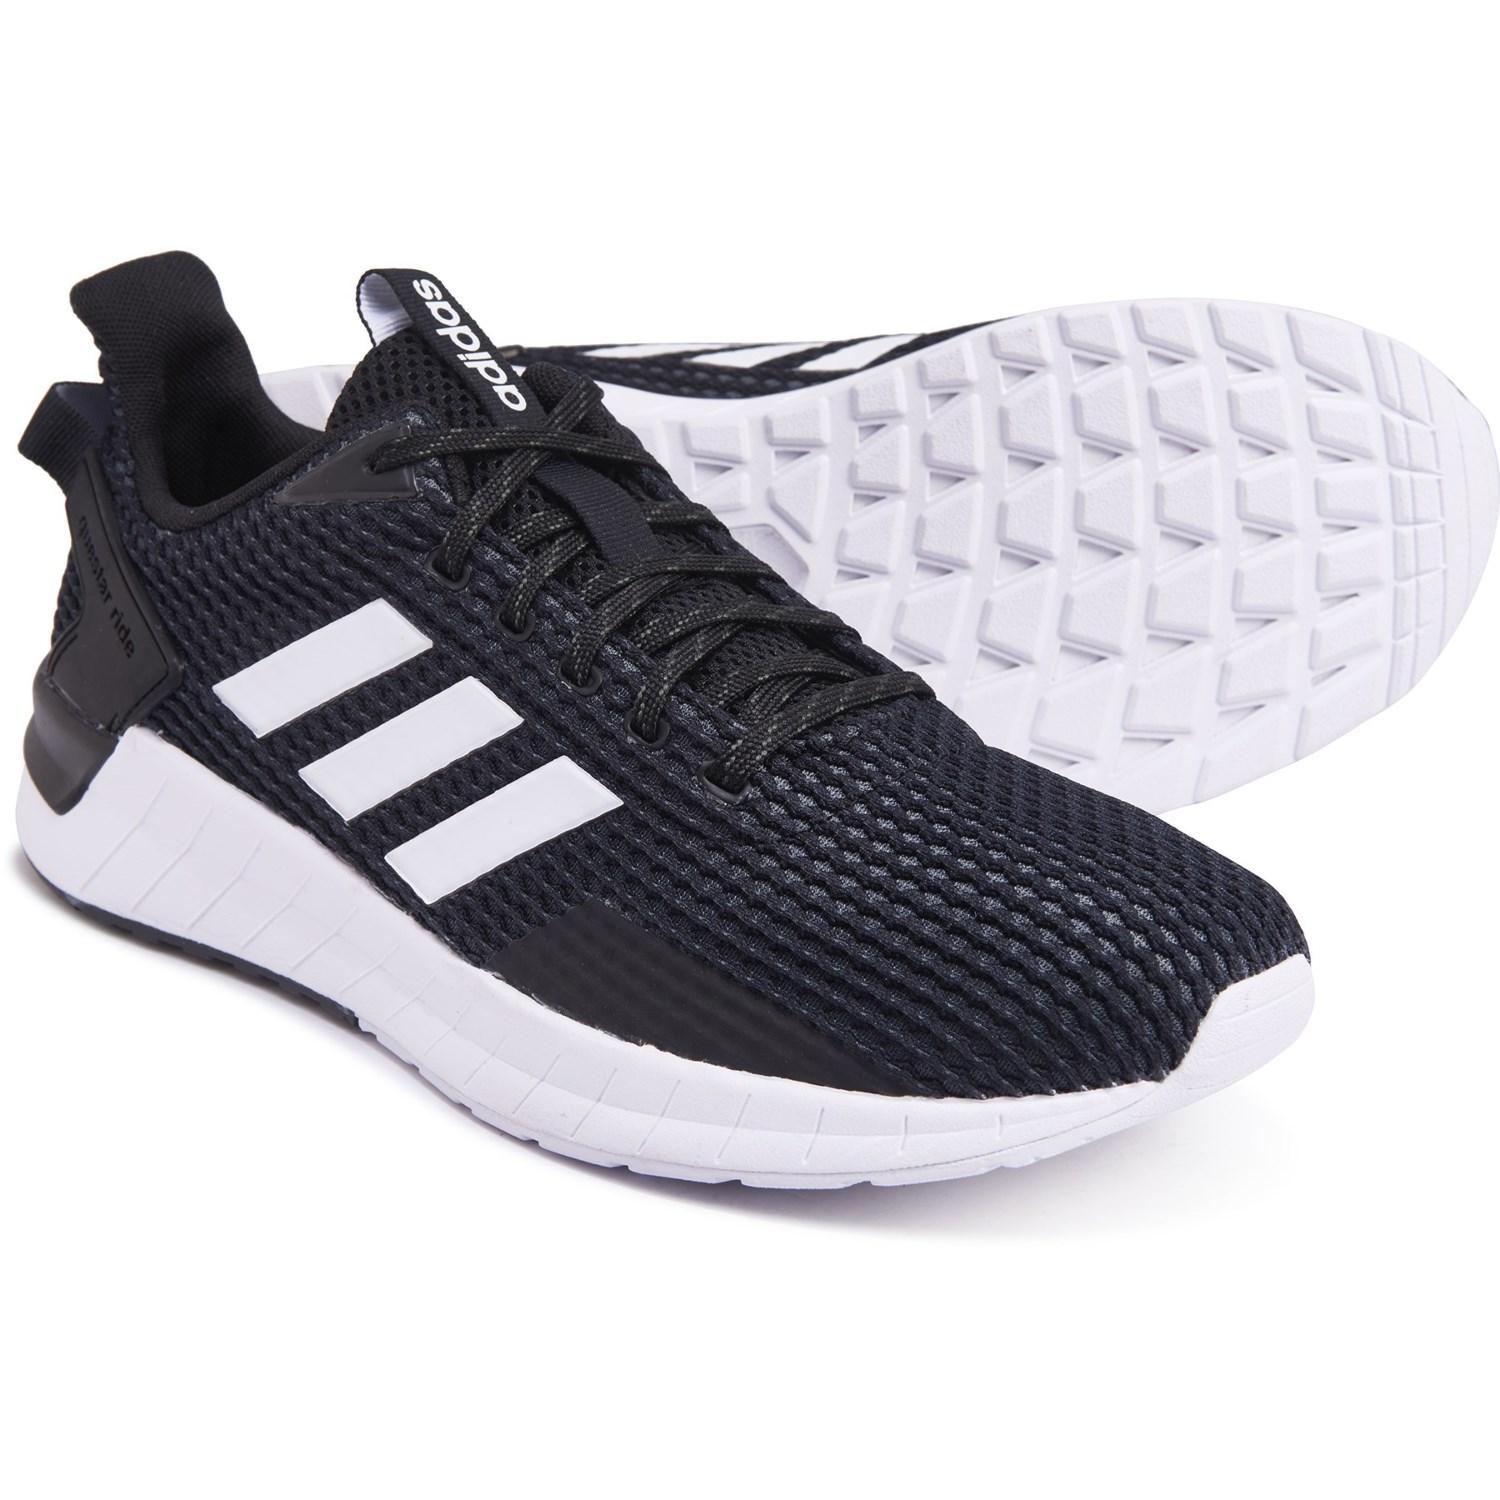 adidas Questar Ride Running Shoes in 